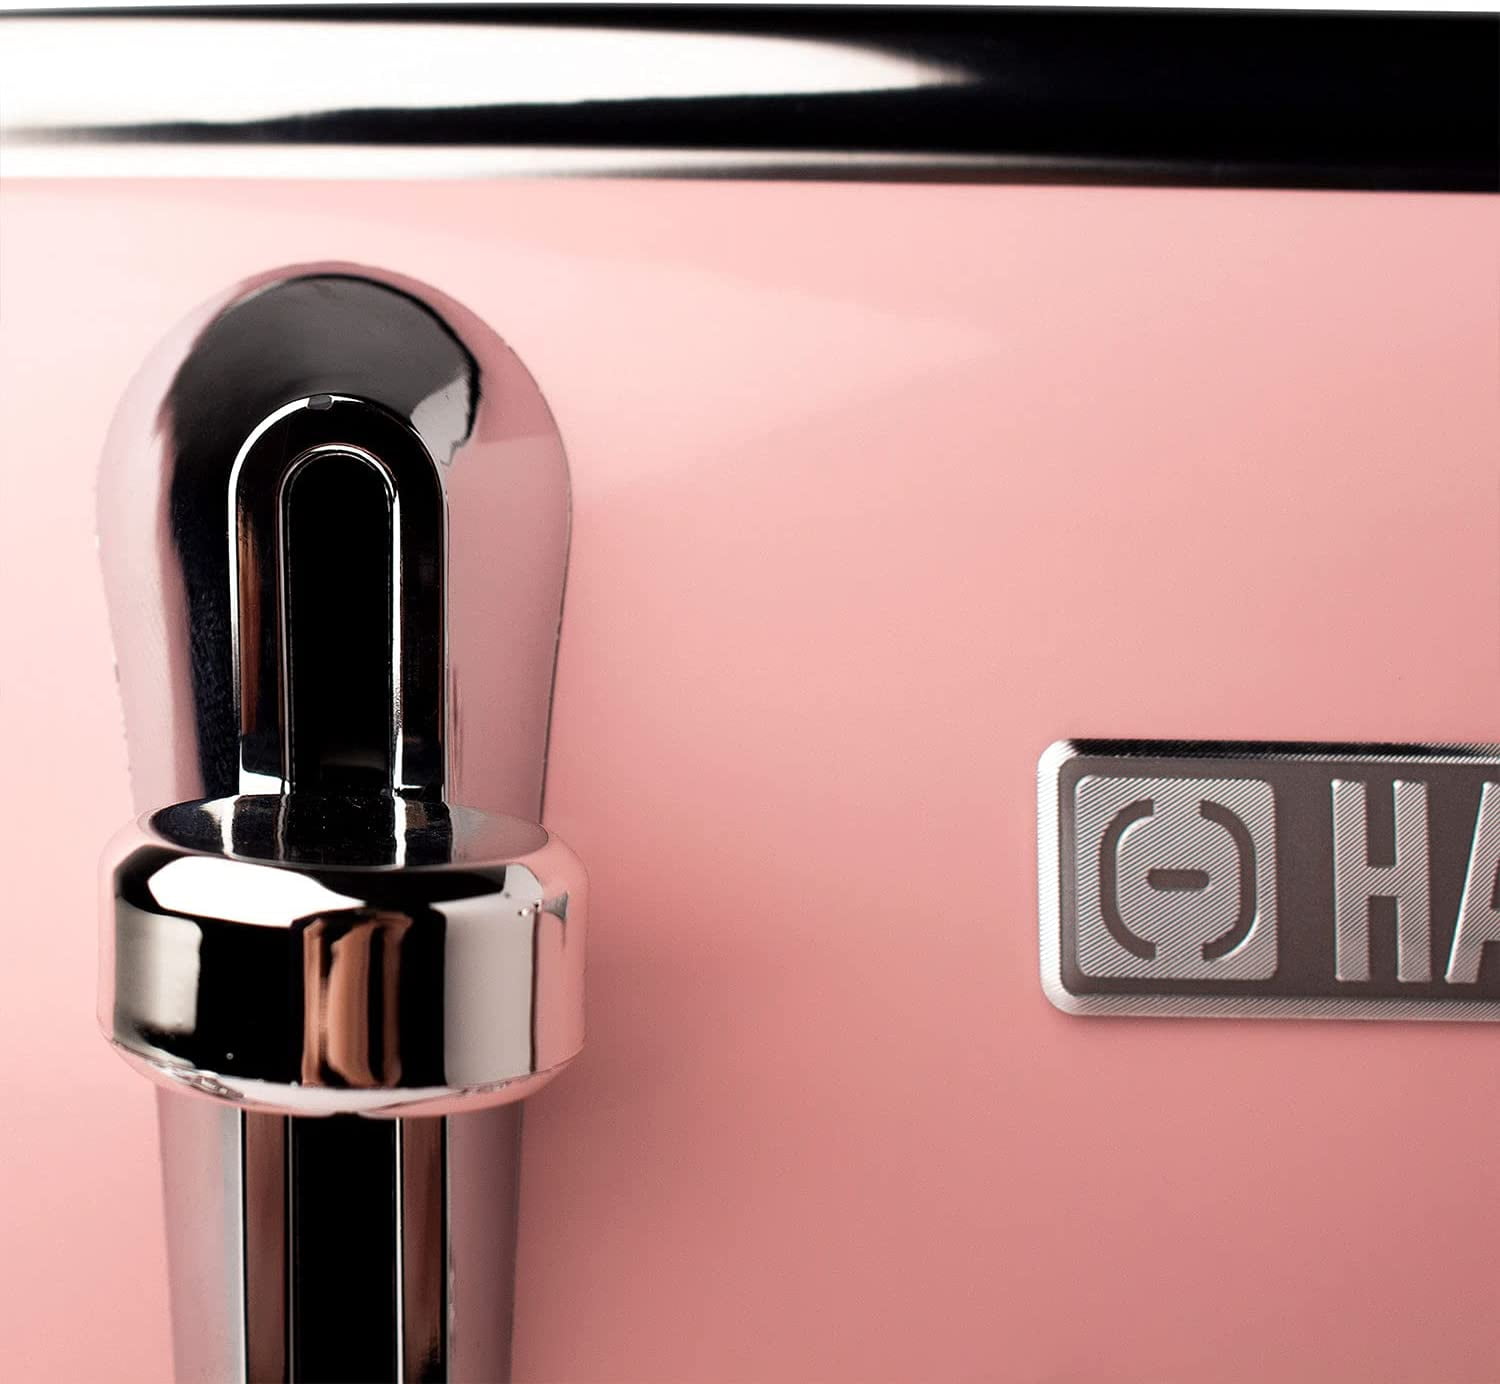 Haden Heritage 1.7 L Stainless Steel Body Electric Kettle w/ Toaster, Pink  